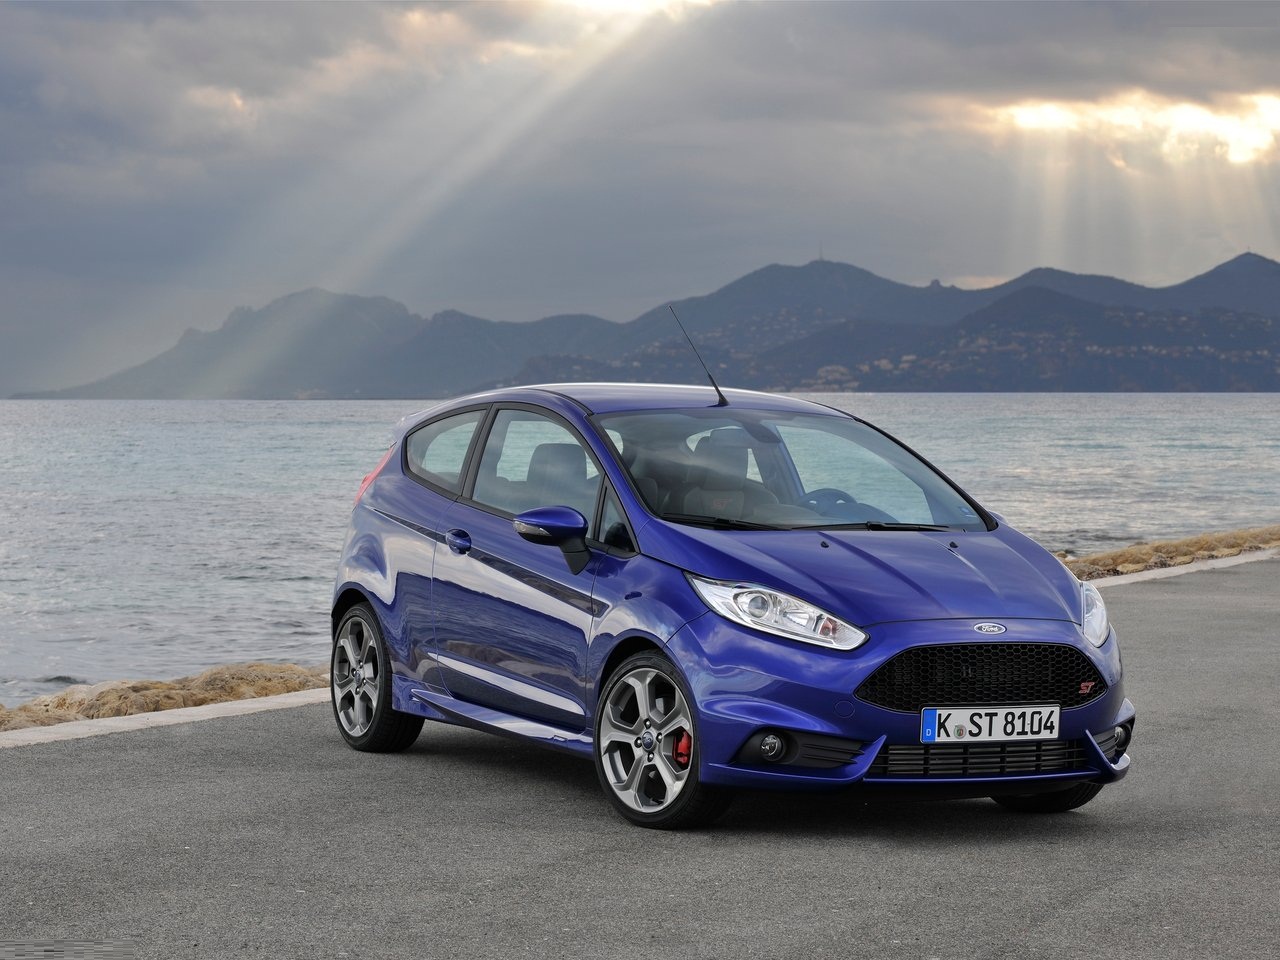 Ford Fiesta St Wallpaper Pictures Pics Photos Image